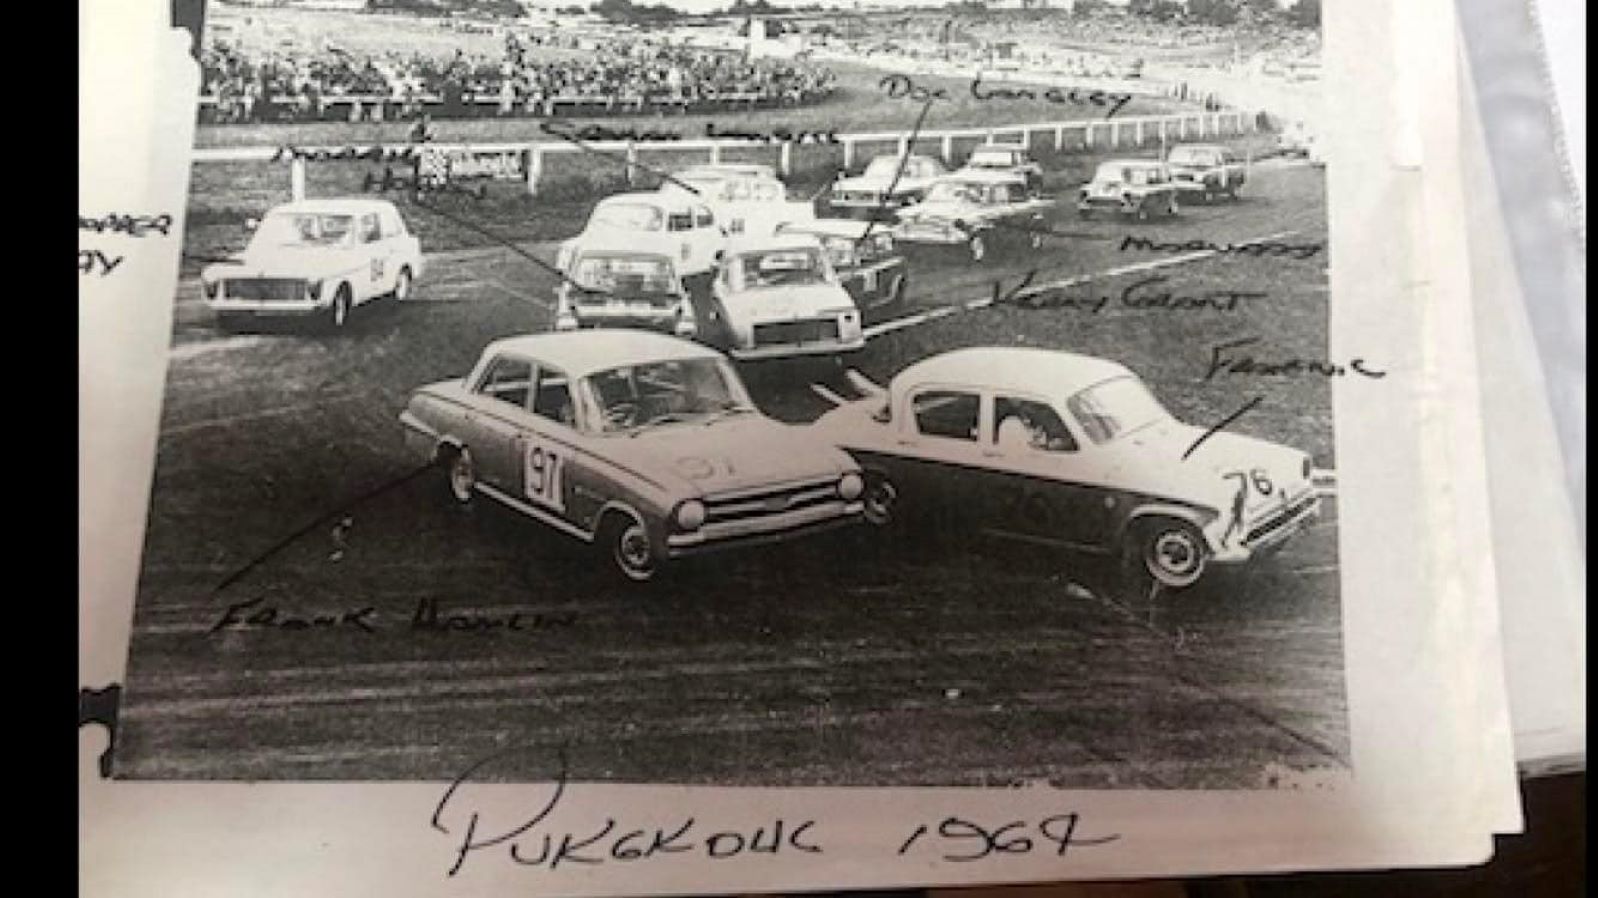 Name:  Pukekohe 1964 #022 1964 Saloon Car field at the Elbow - GP meeting Q 172 kb arch HVRA Bruce Dyer.jpg
Views: 356
Size:  172.4 KB